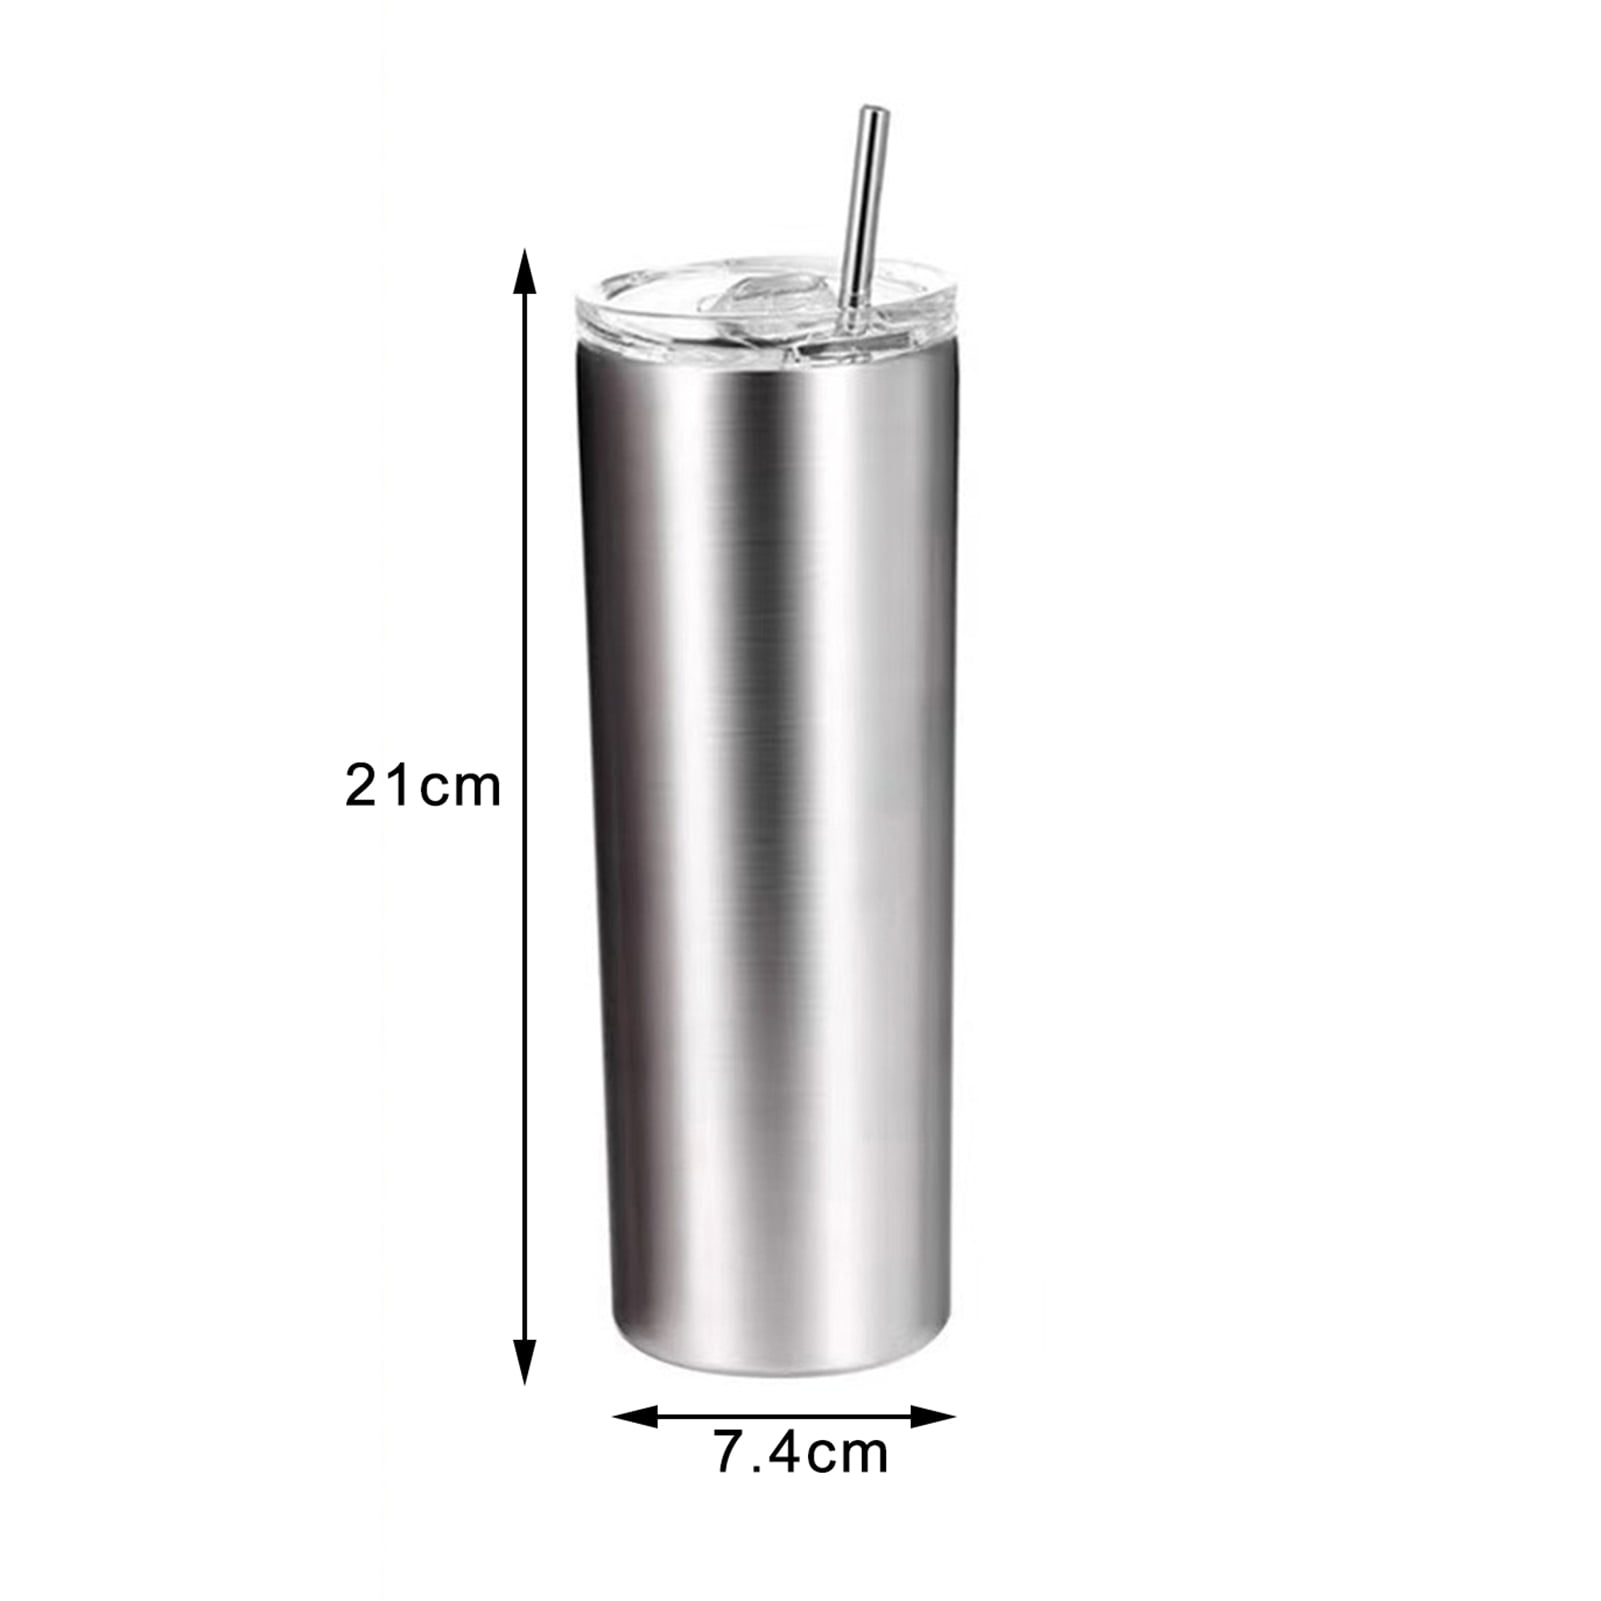 IamTunneyW on X: DÈCOR 650ml Extra Large Double Wall Smoothie & Coffee  Tumbler 20-hour hot 10-hour cold rating #bariatricbabes #bariatricsleeve  #gastricsleevesurgery #rissarecharged #sleevedlife  #verticalsleevegastrectomy #vsginstacrew #vsglife